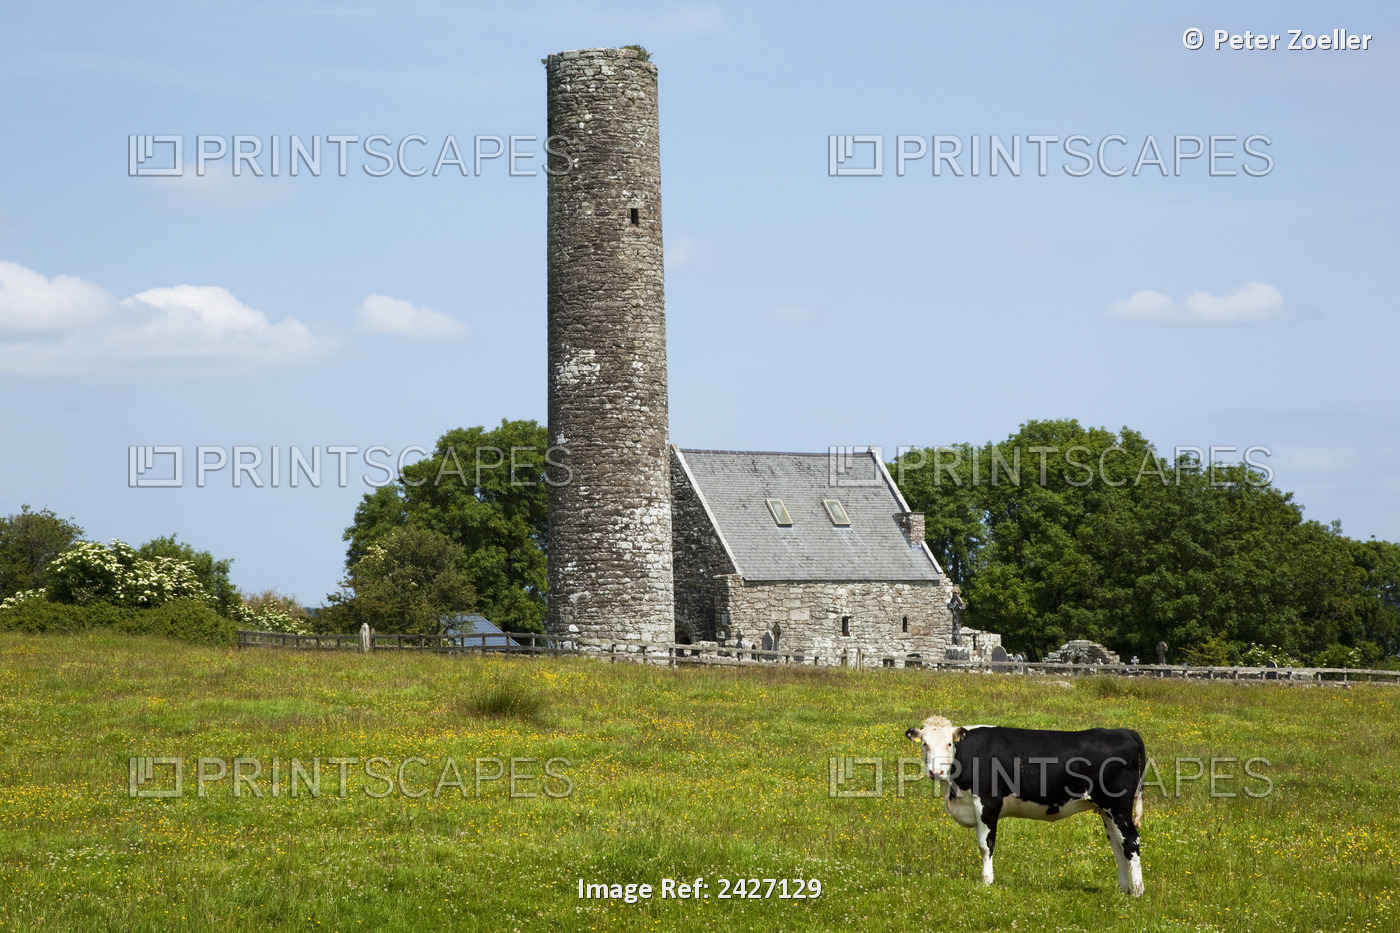 The Roundtower On Holy Island At Lough Derg; County Clare, Ireland